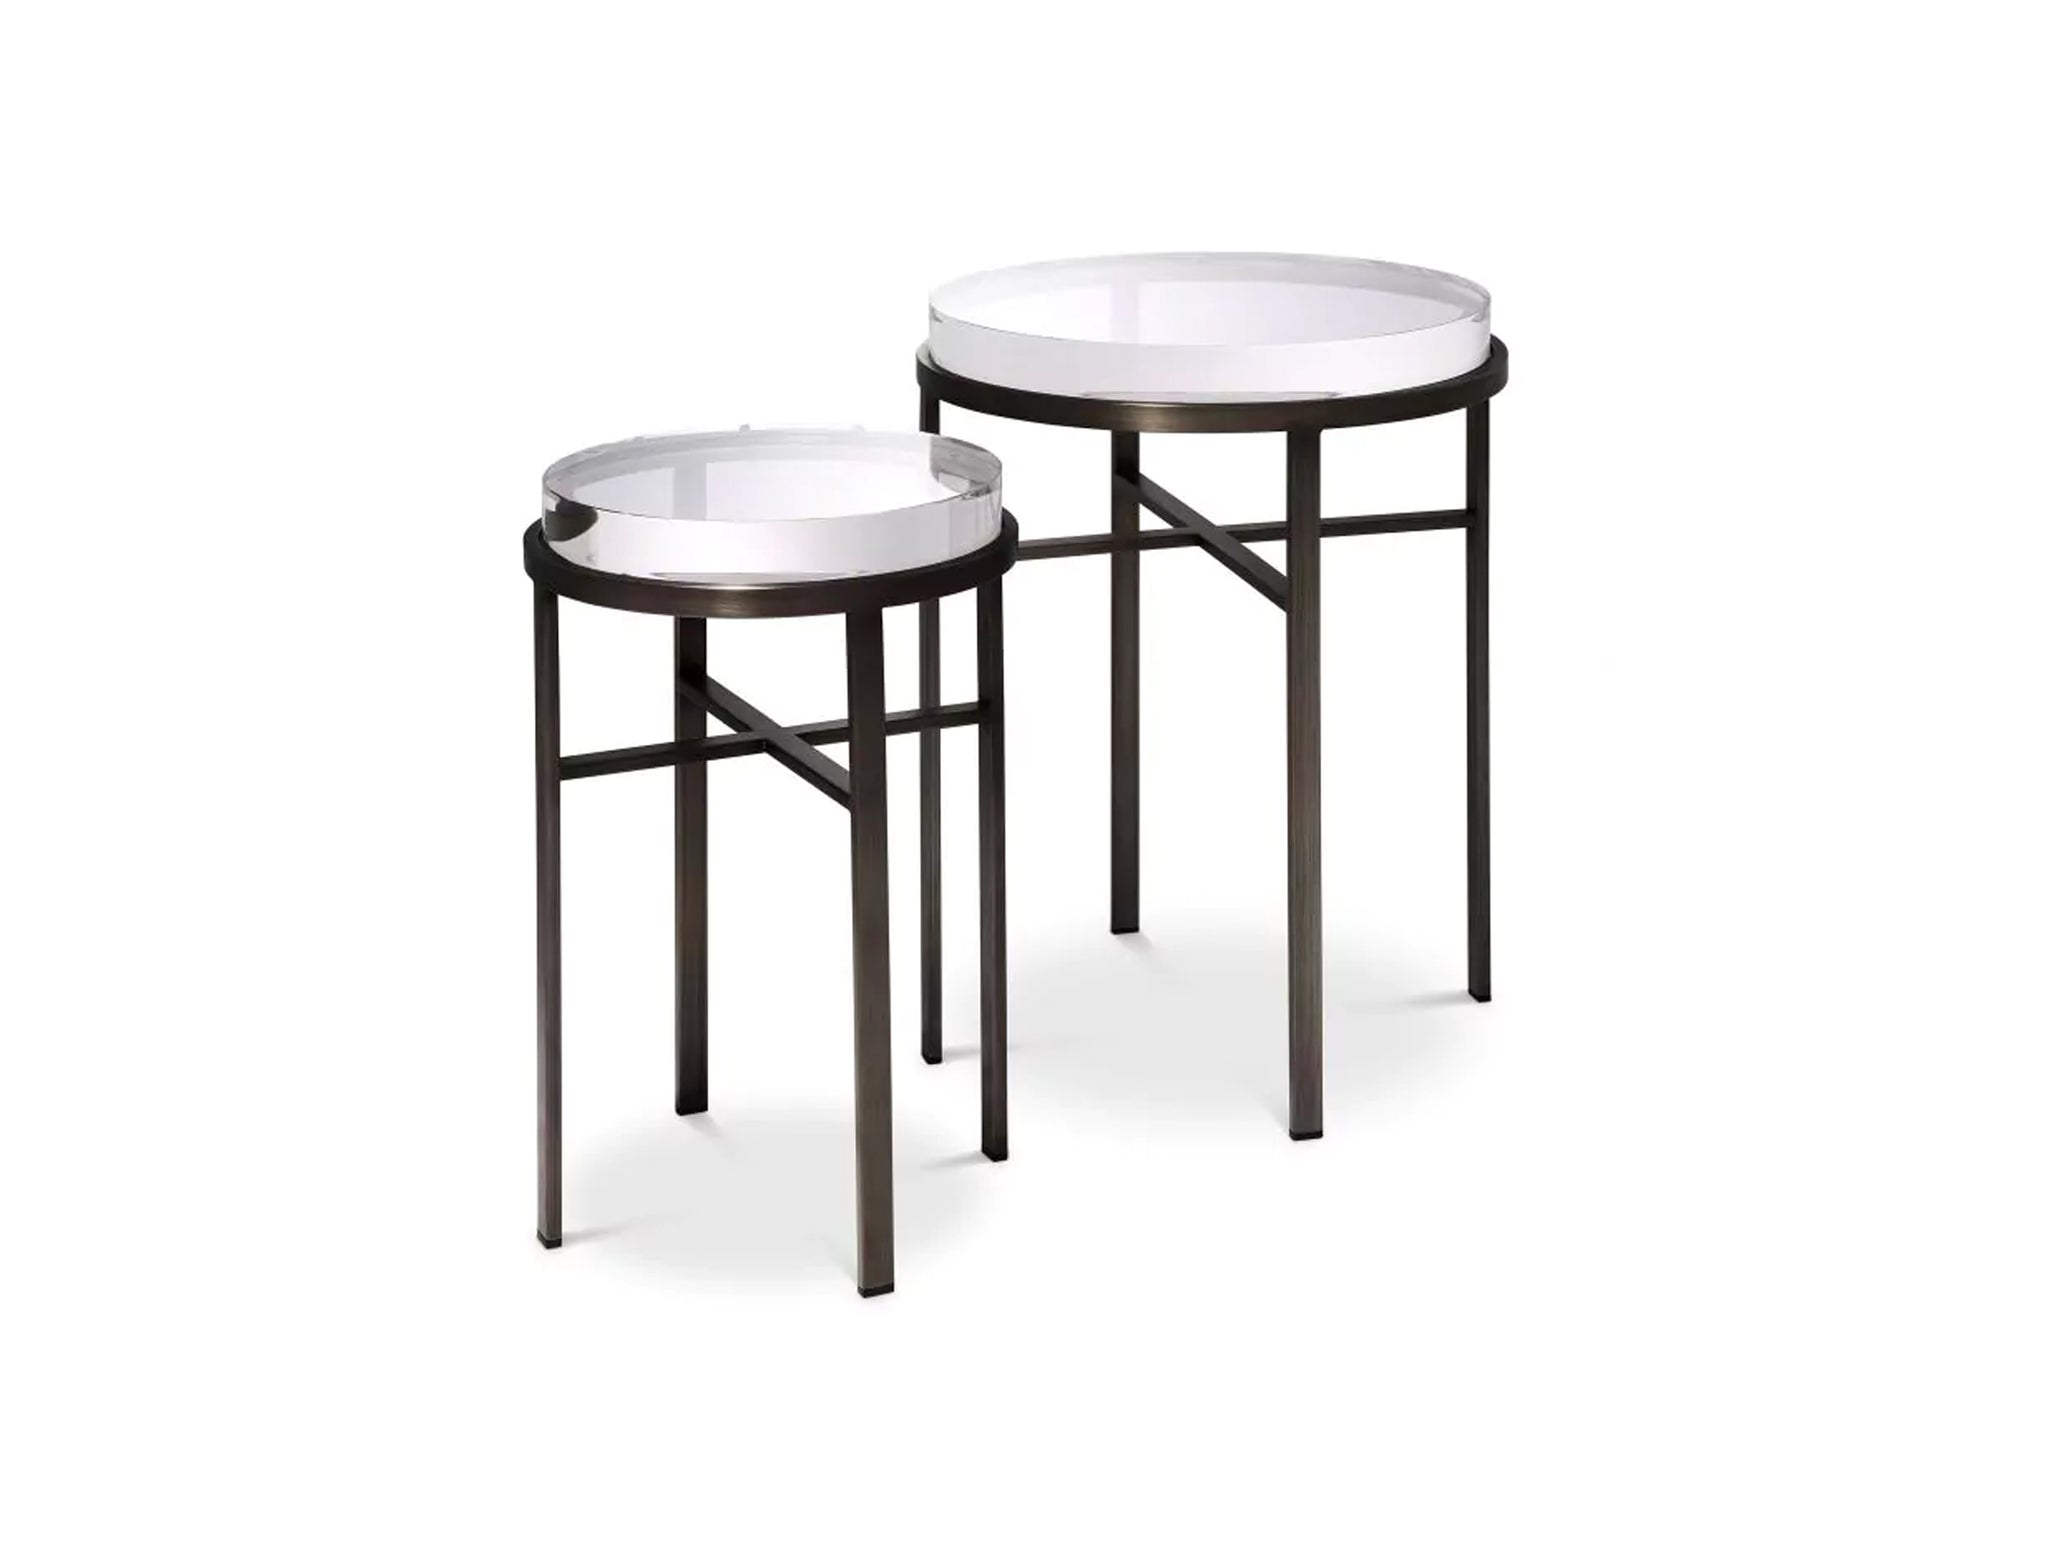 Looking Glass Nesting Tables